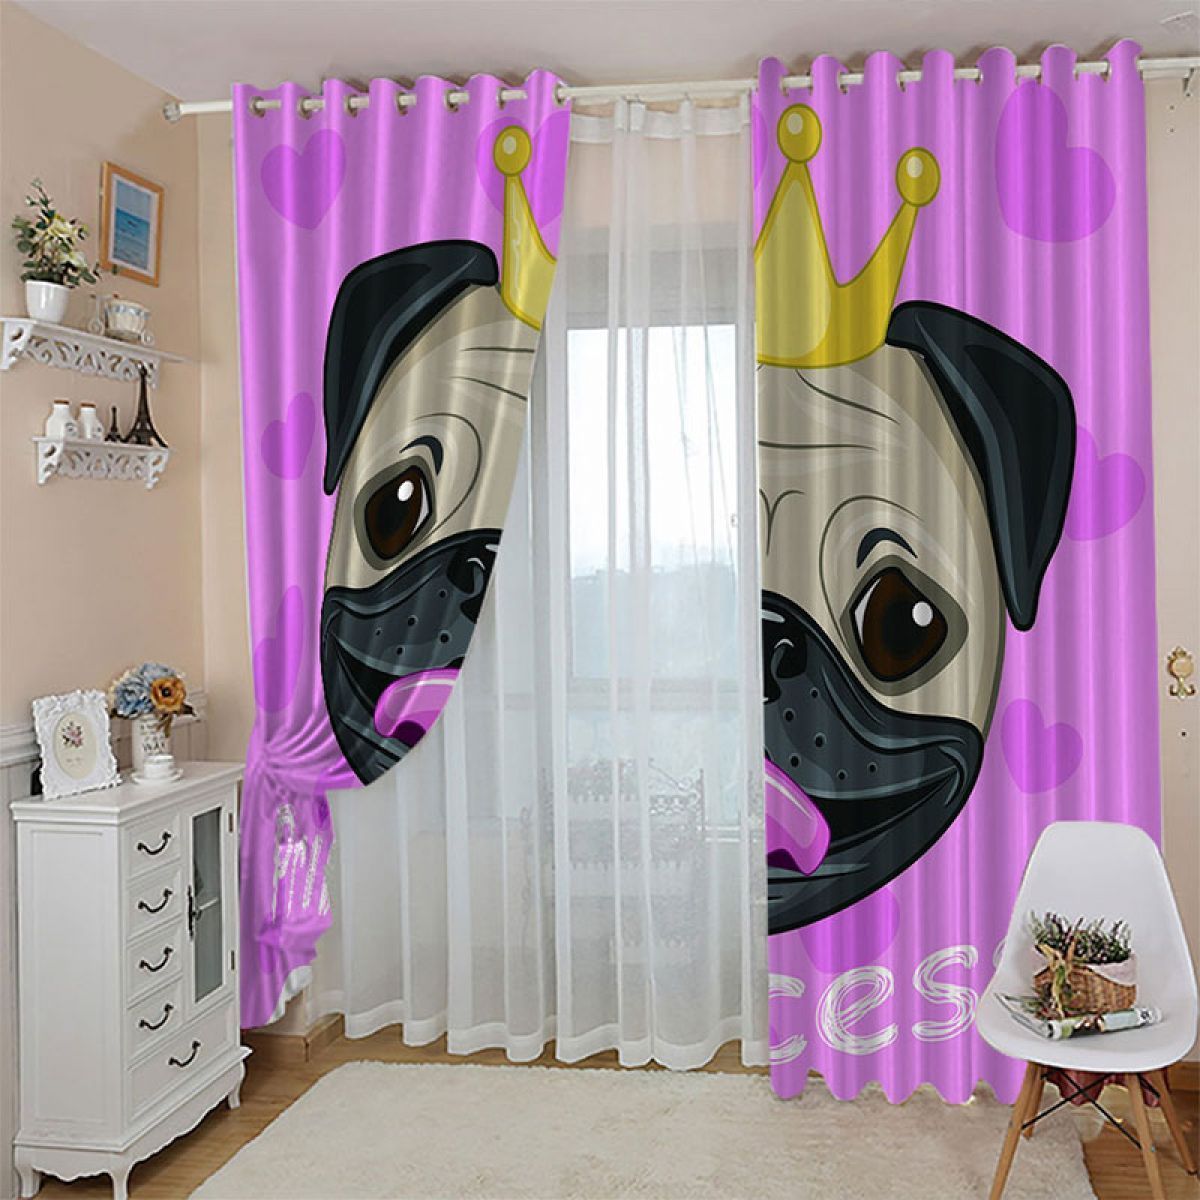 3d funny pug with crown printed window curtain home decor 2536